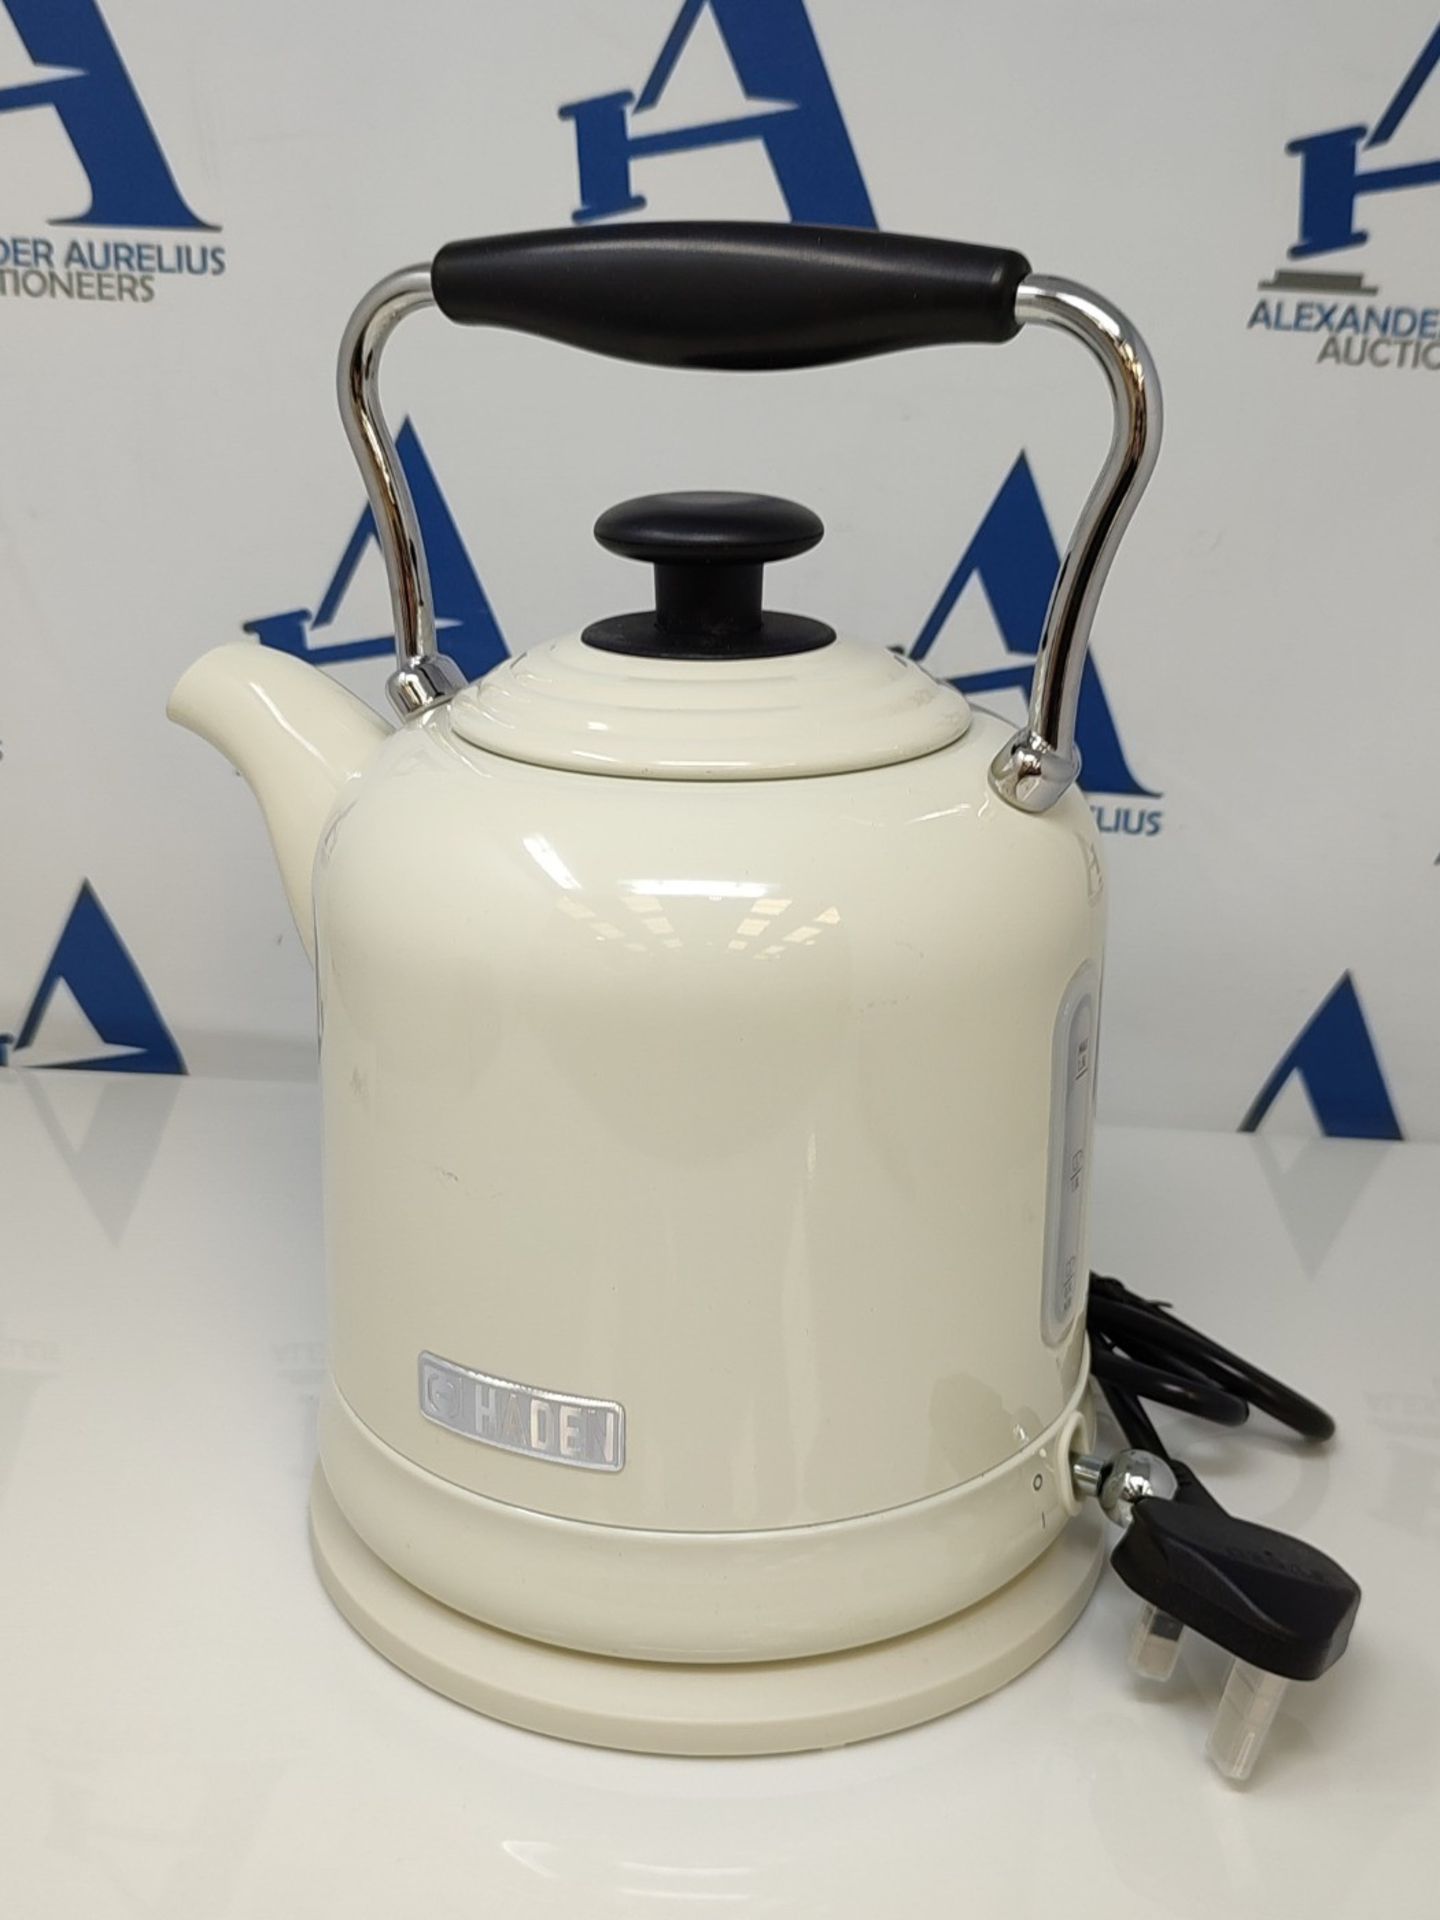 Haden Highclere Cream Kettle Cordless - Electric Fast Boil Kettle, 3000W, 1.5 Litre, S - Image 2 of 2